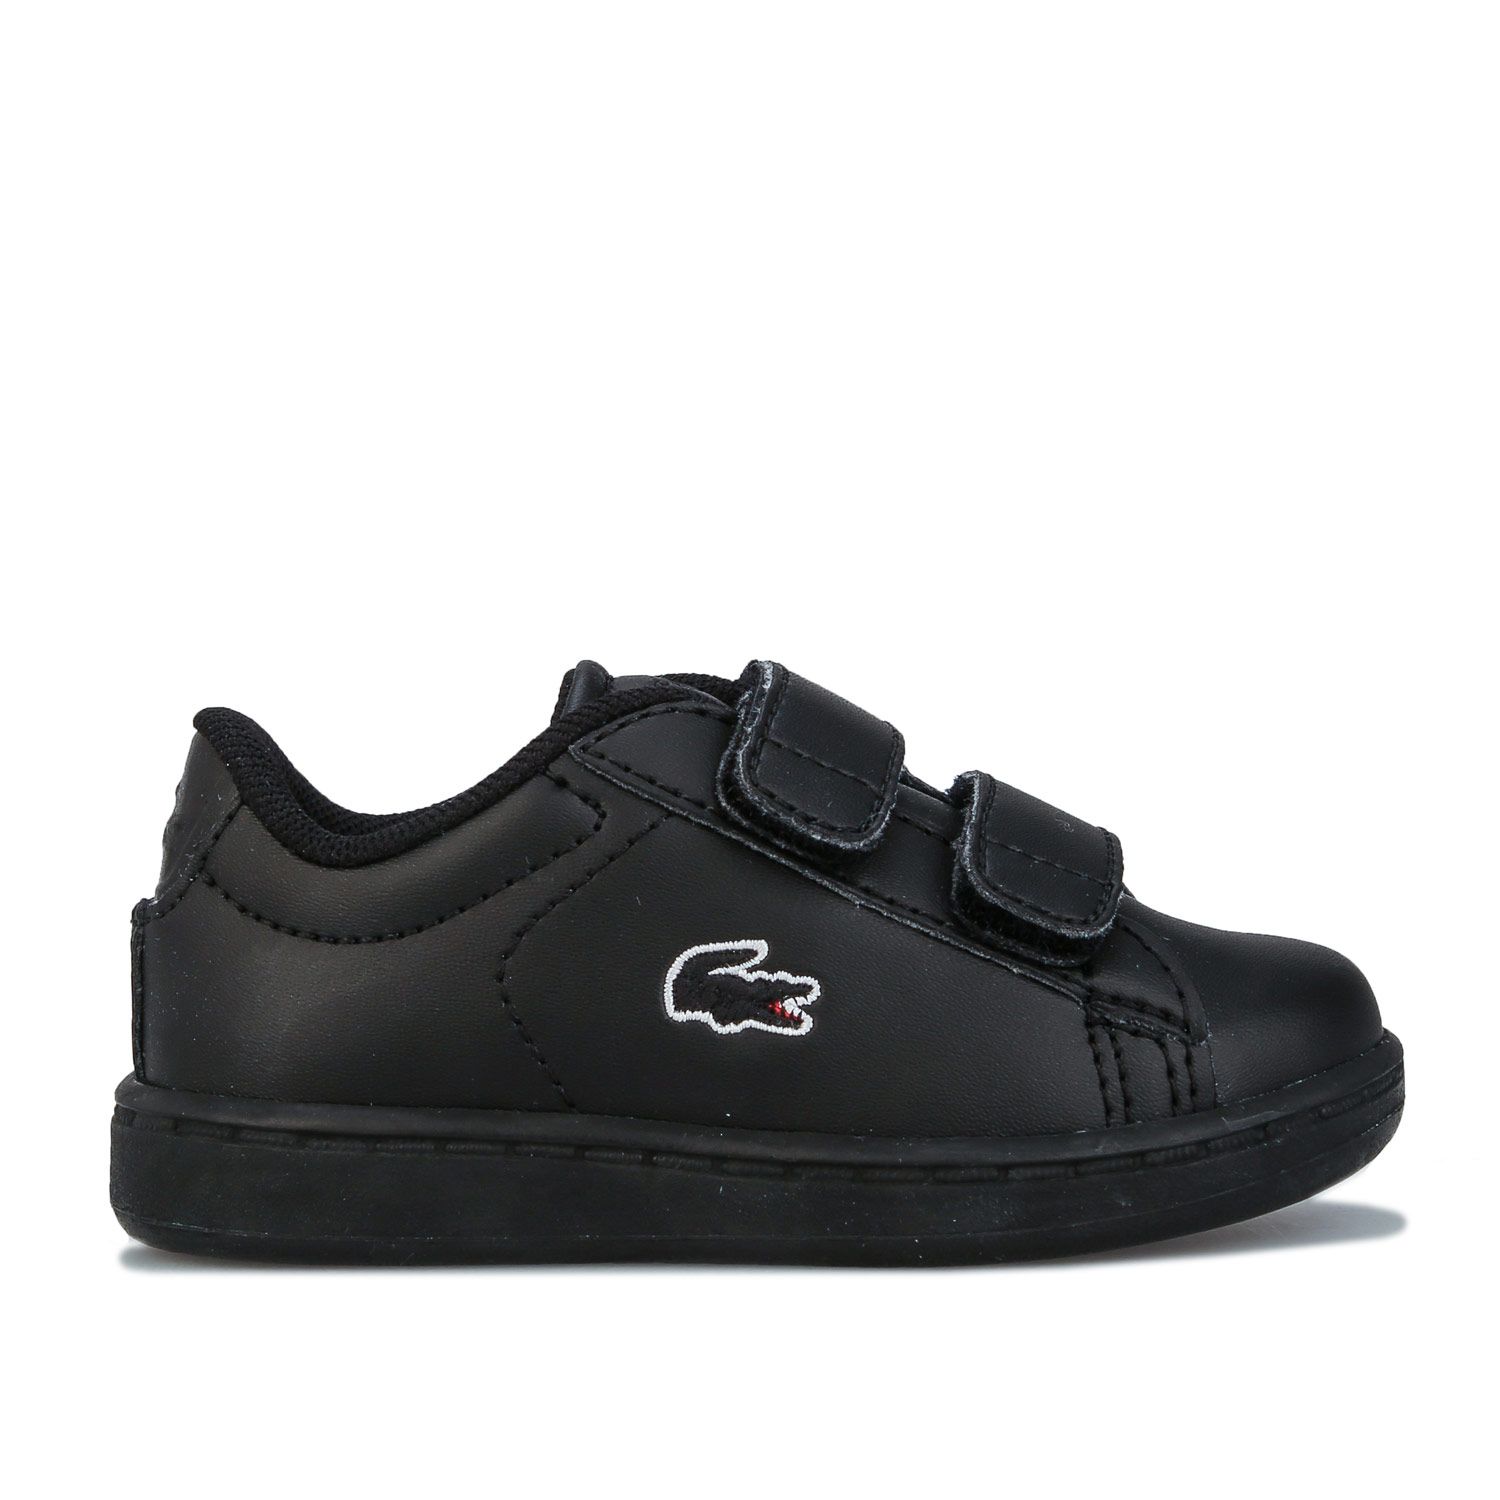 Infant Boys Carnaby Evo Trainers